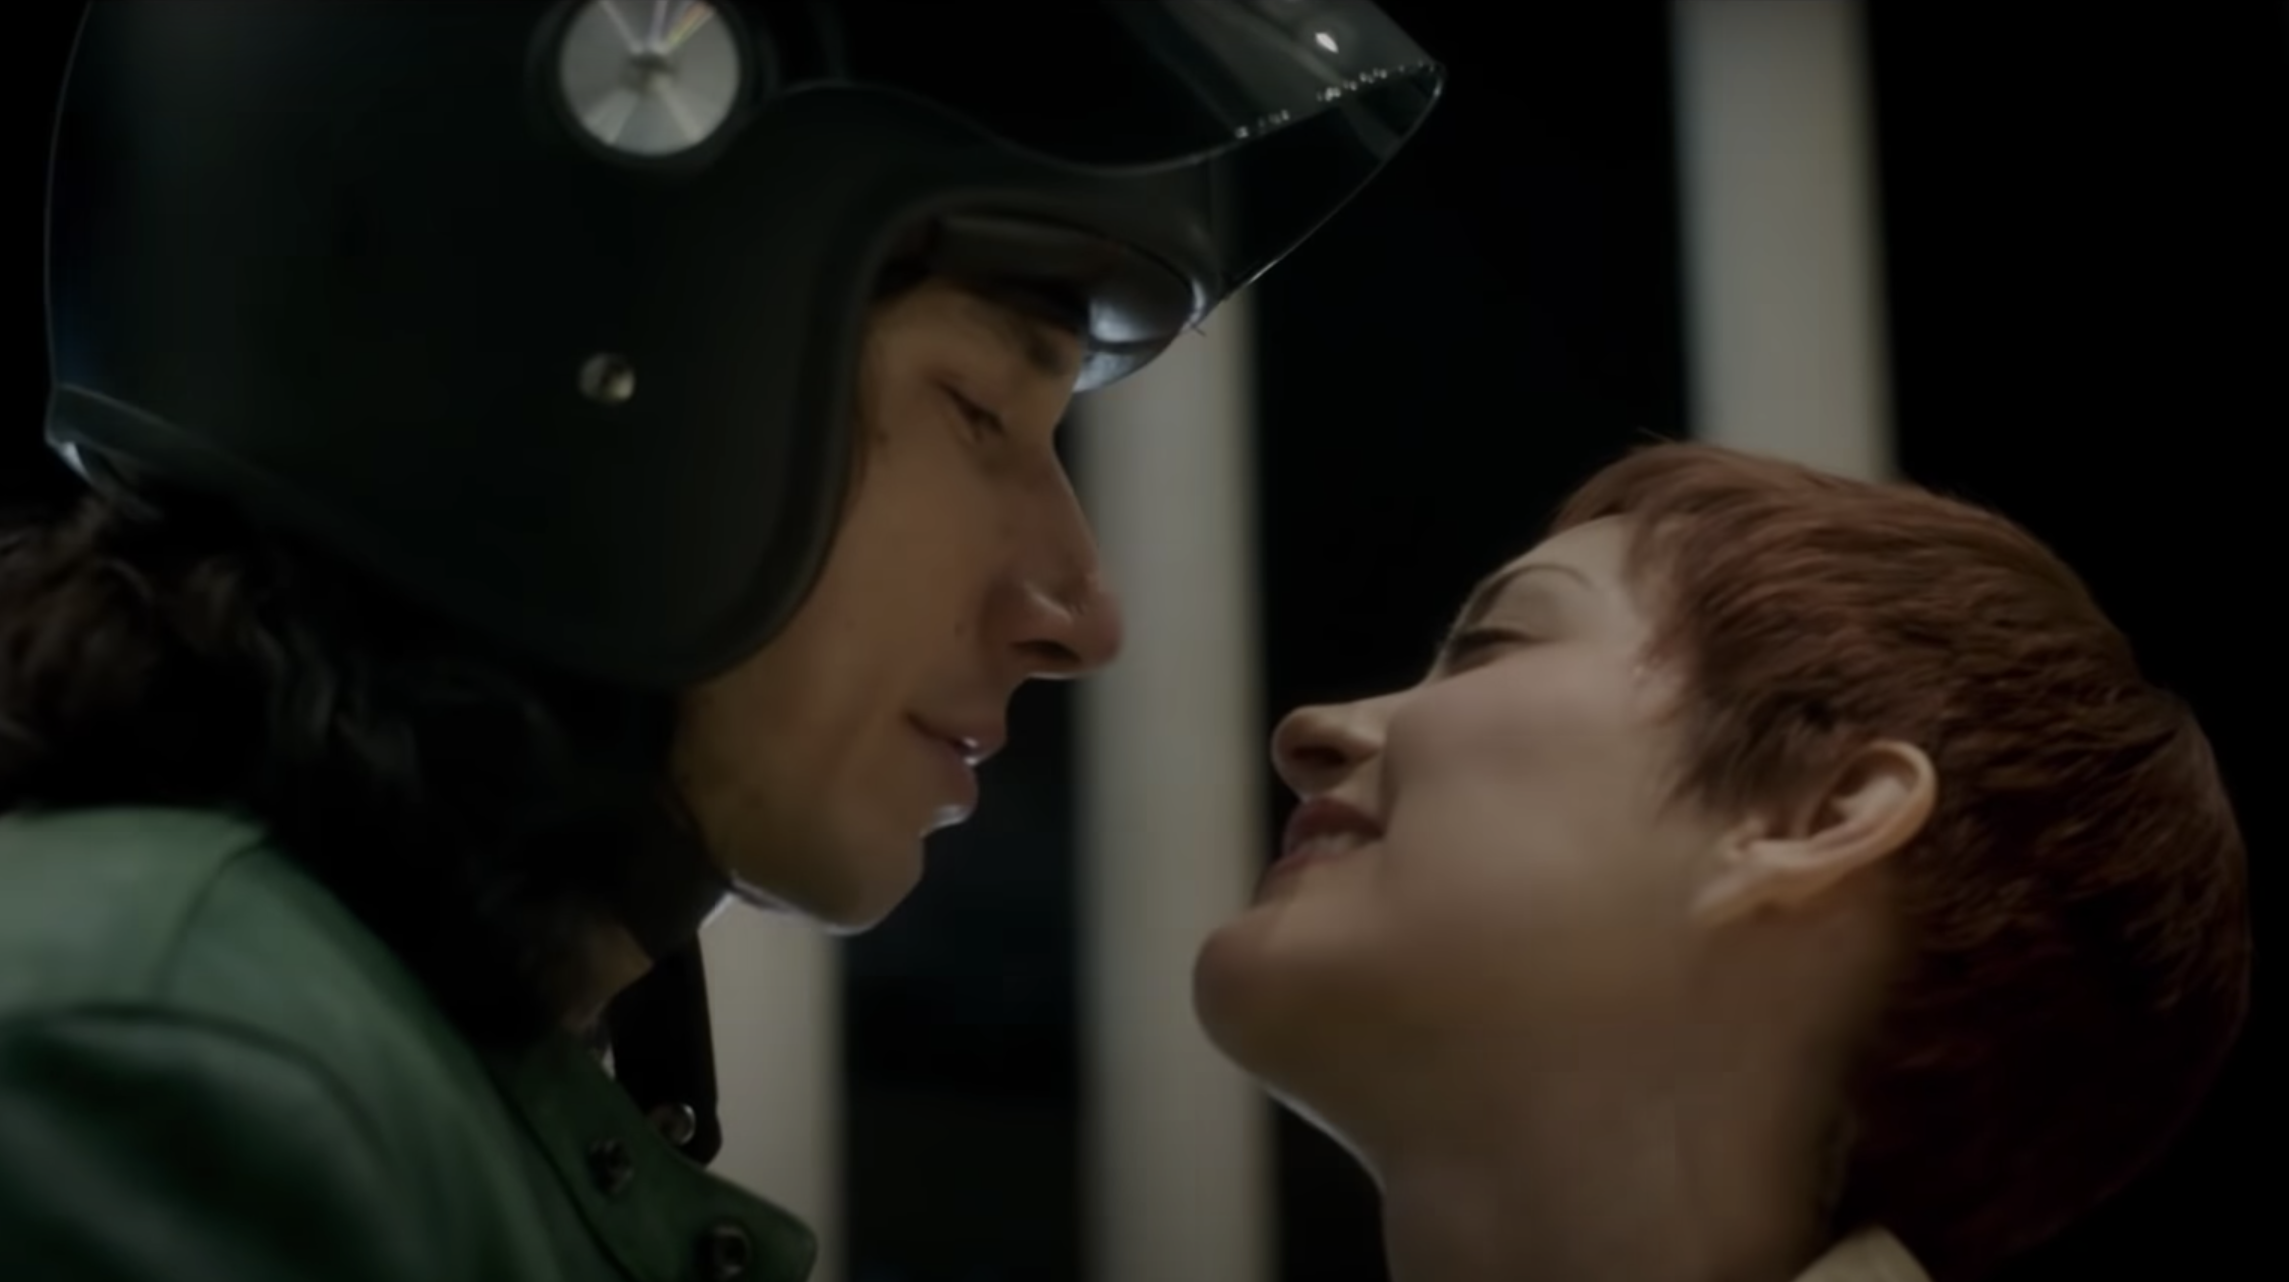 Adam Driver and Marion Cotillard crank up the sex appeal and surrealism in final Annette trailer